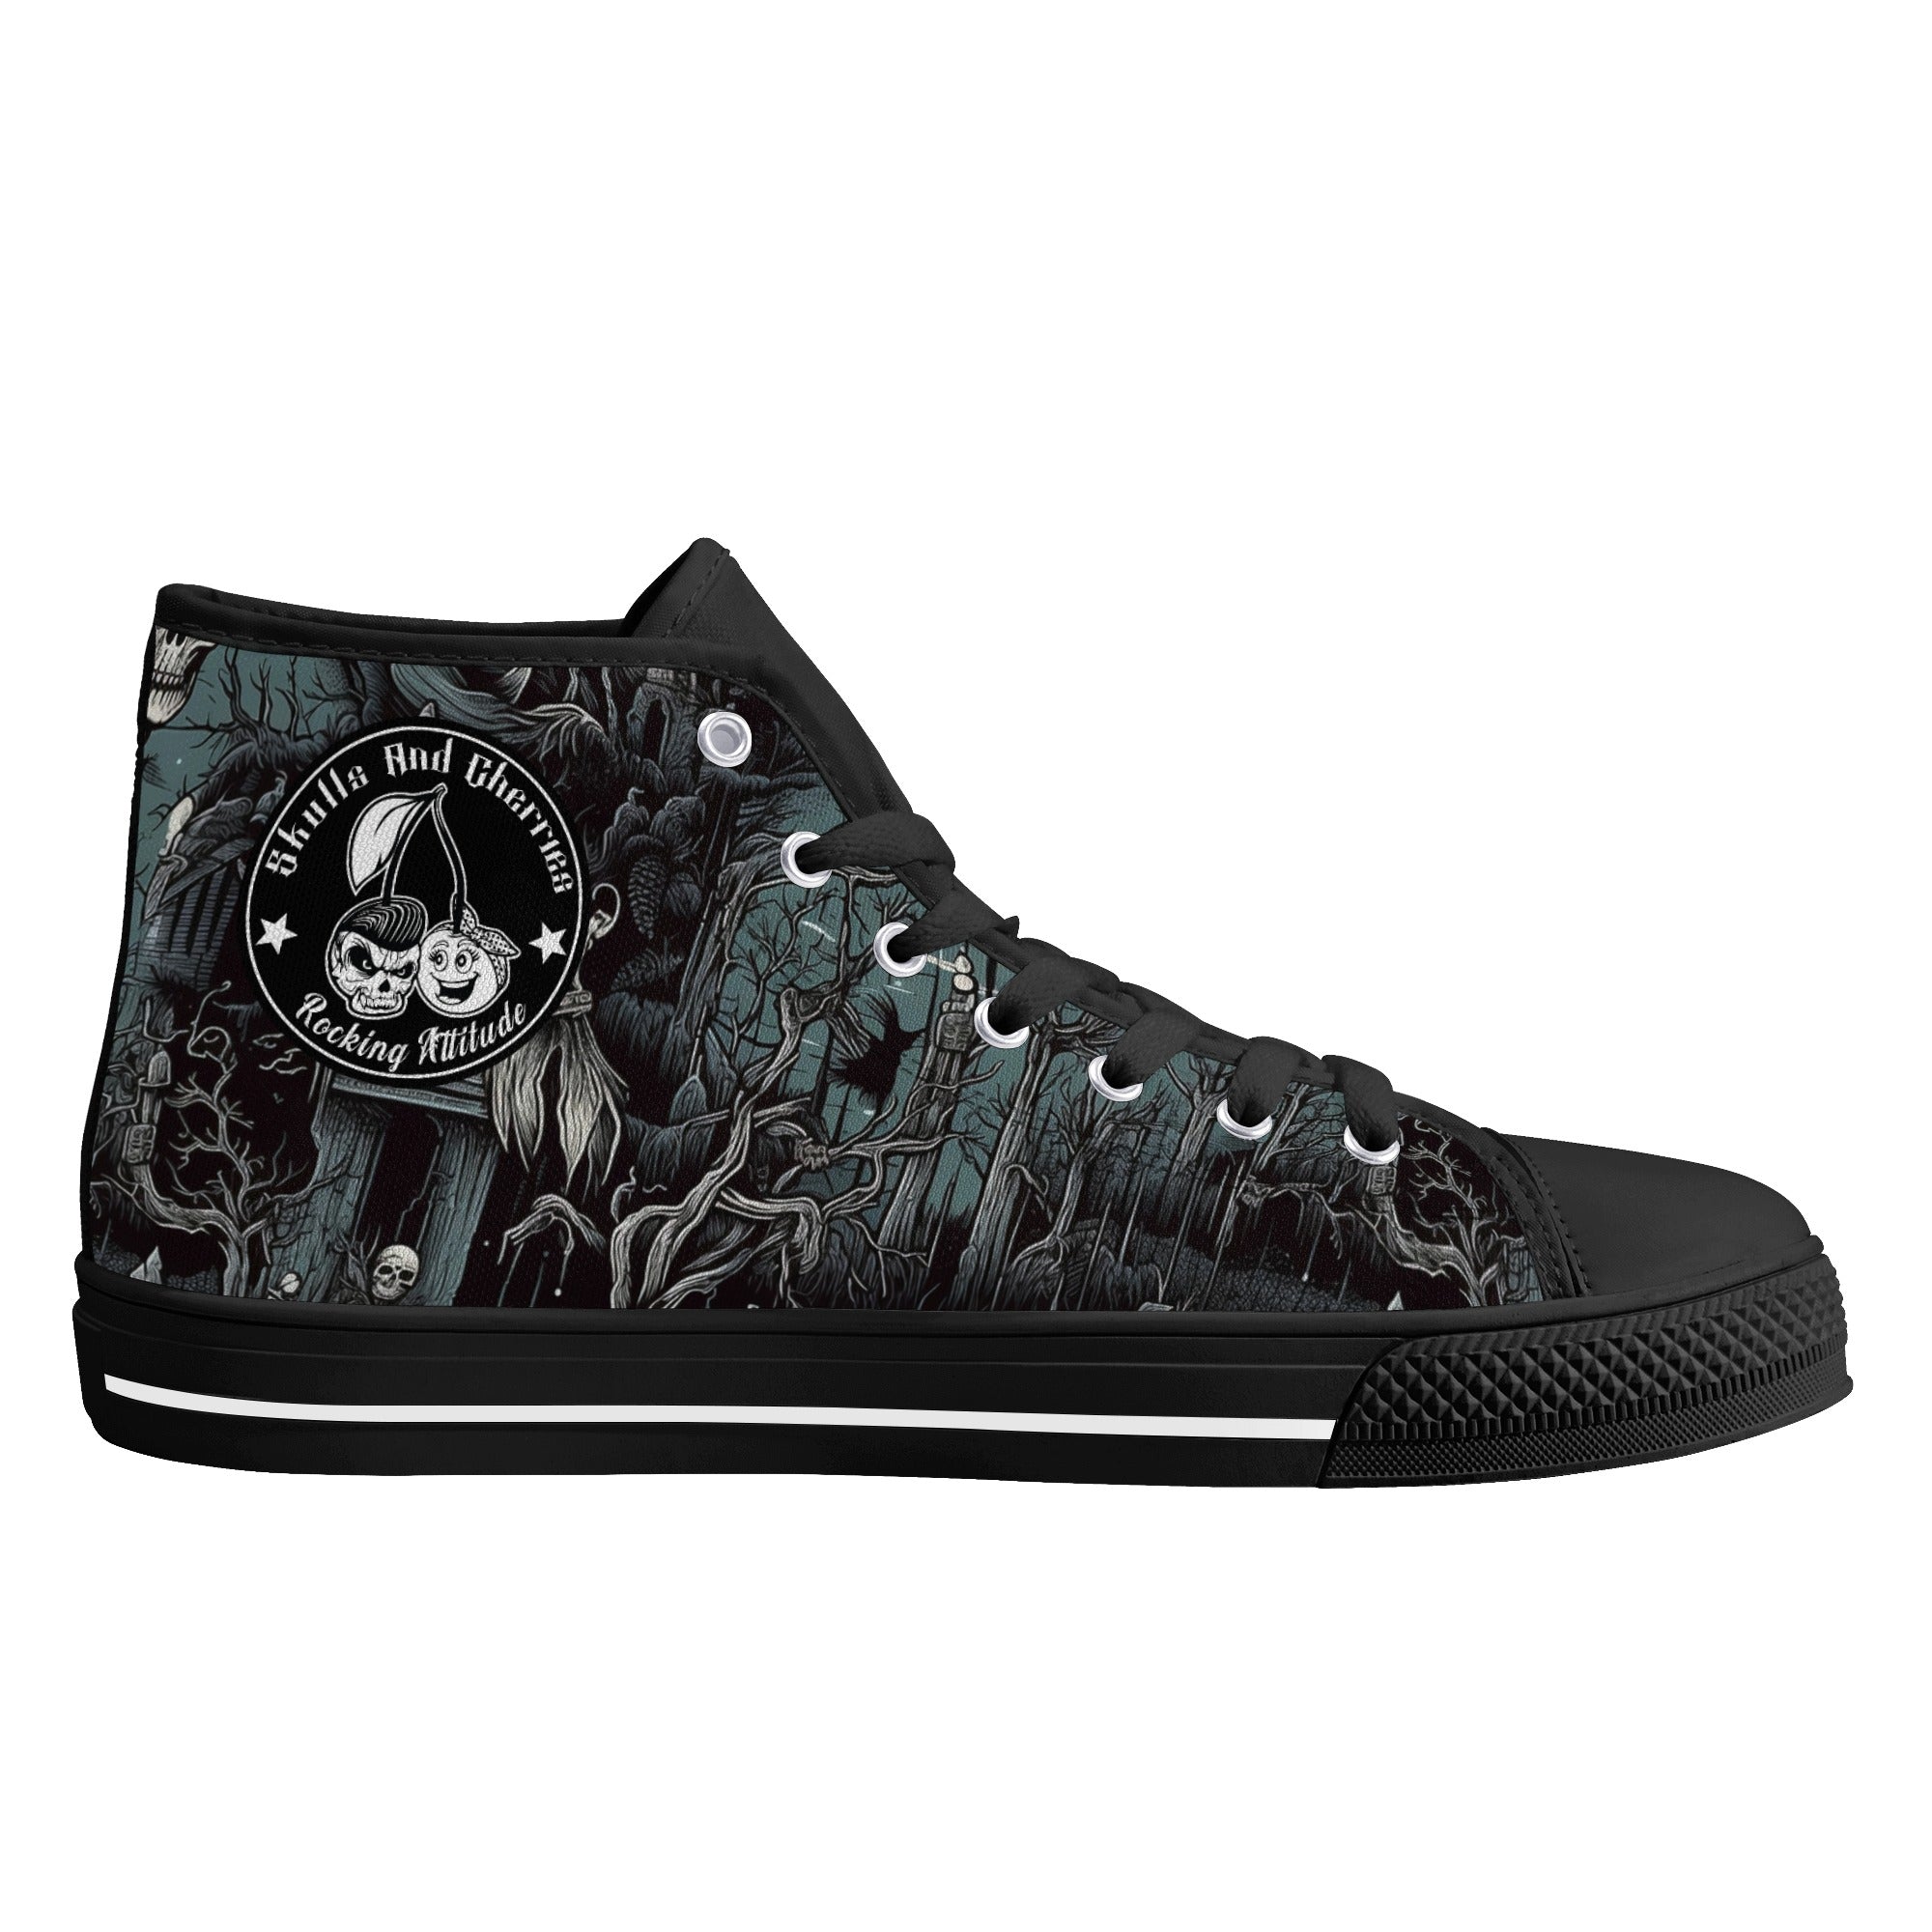 Haunted Scenery with Skulls Women's Psychobilly High Top shoes